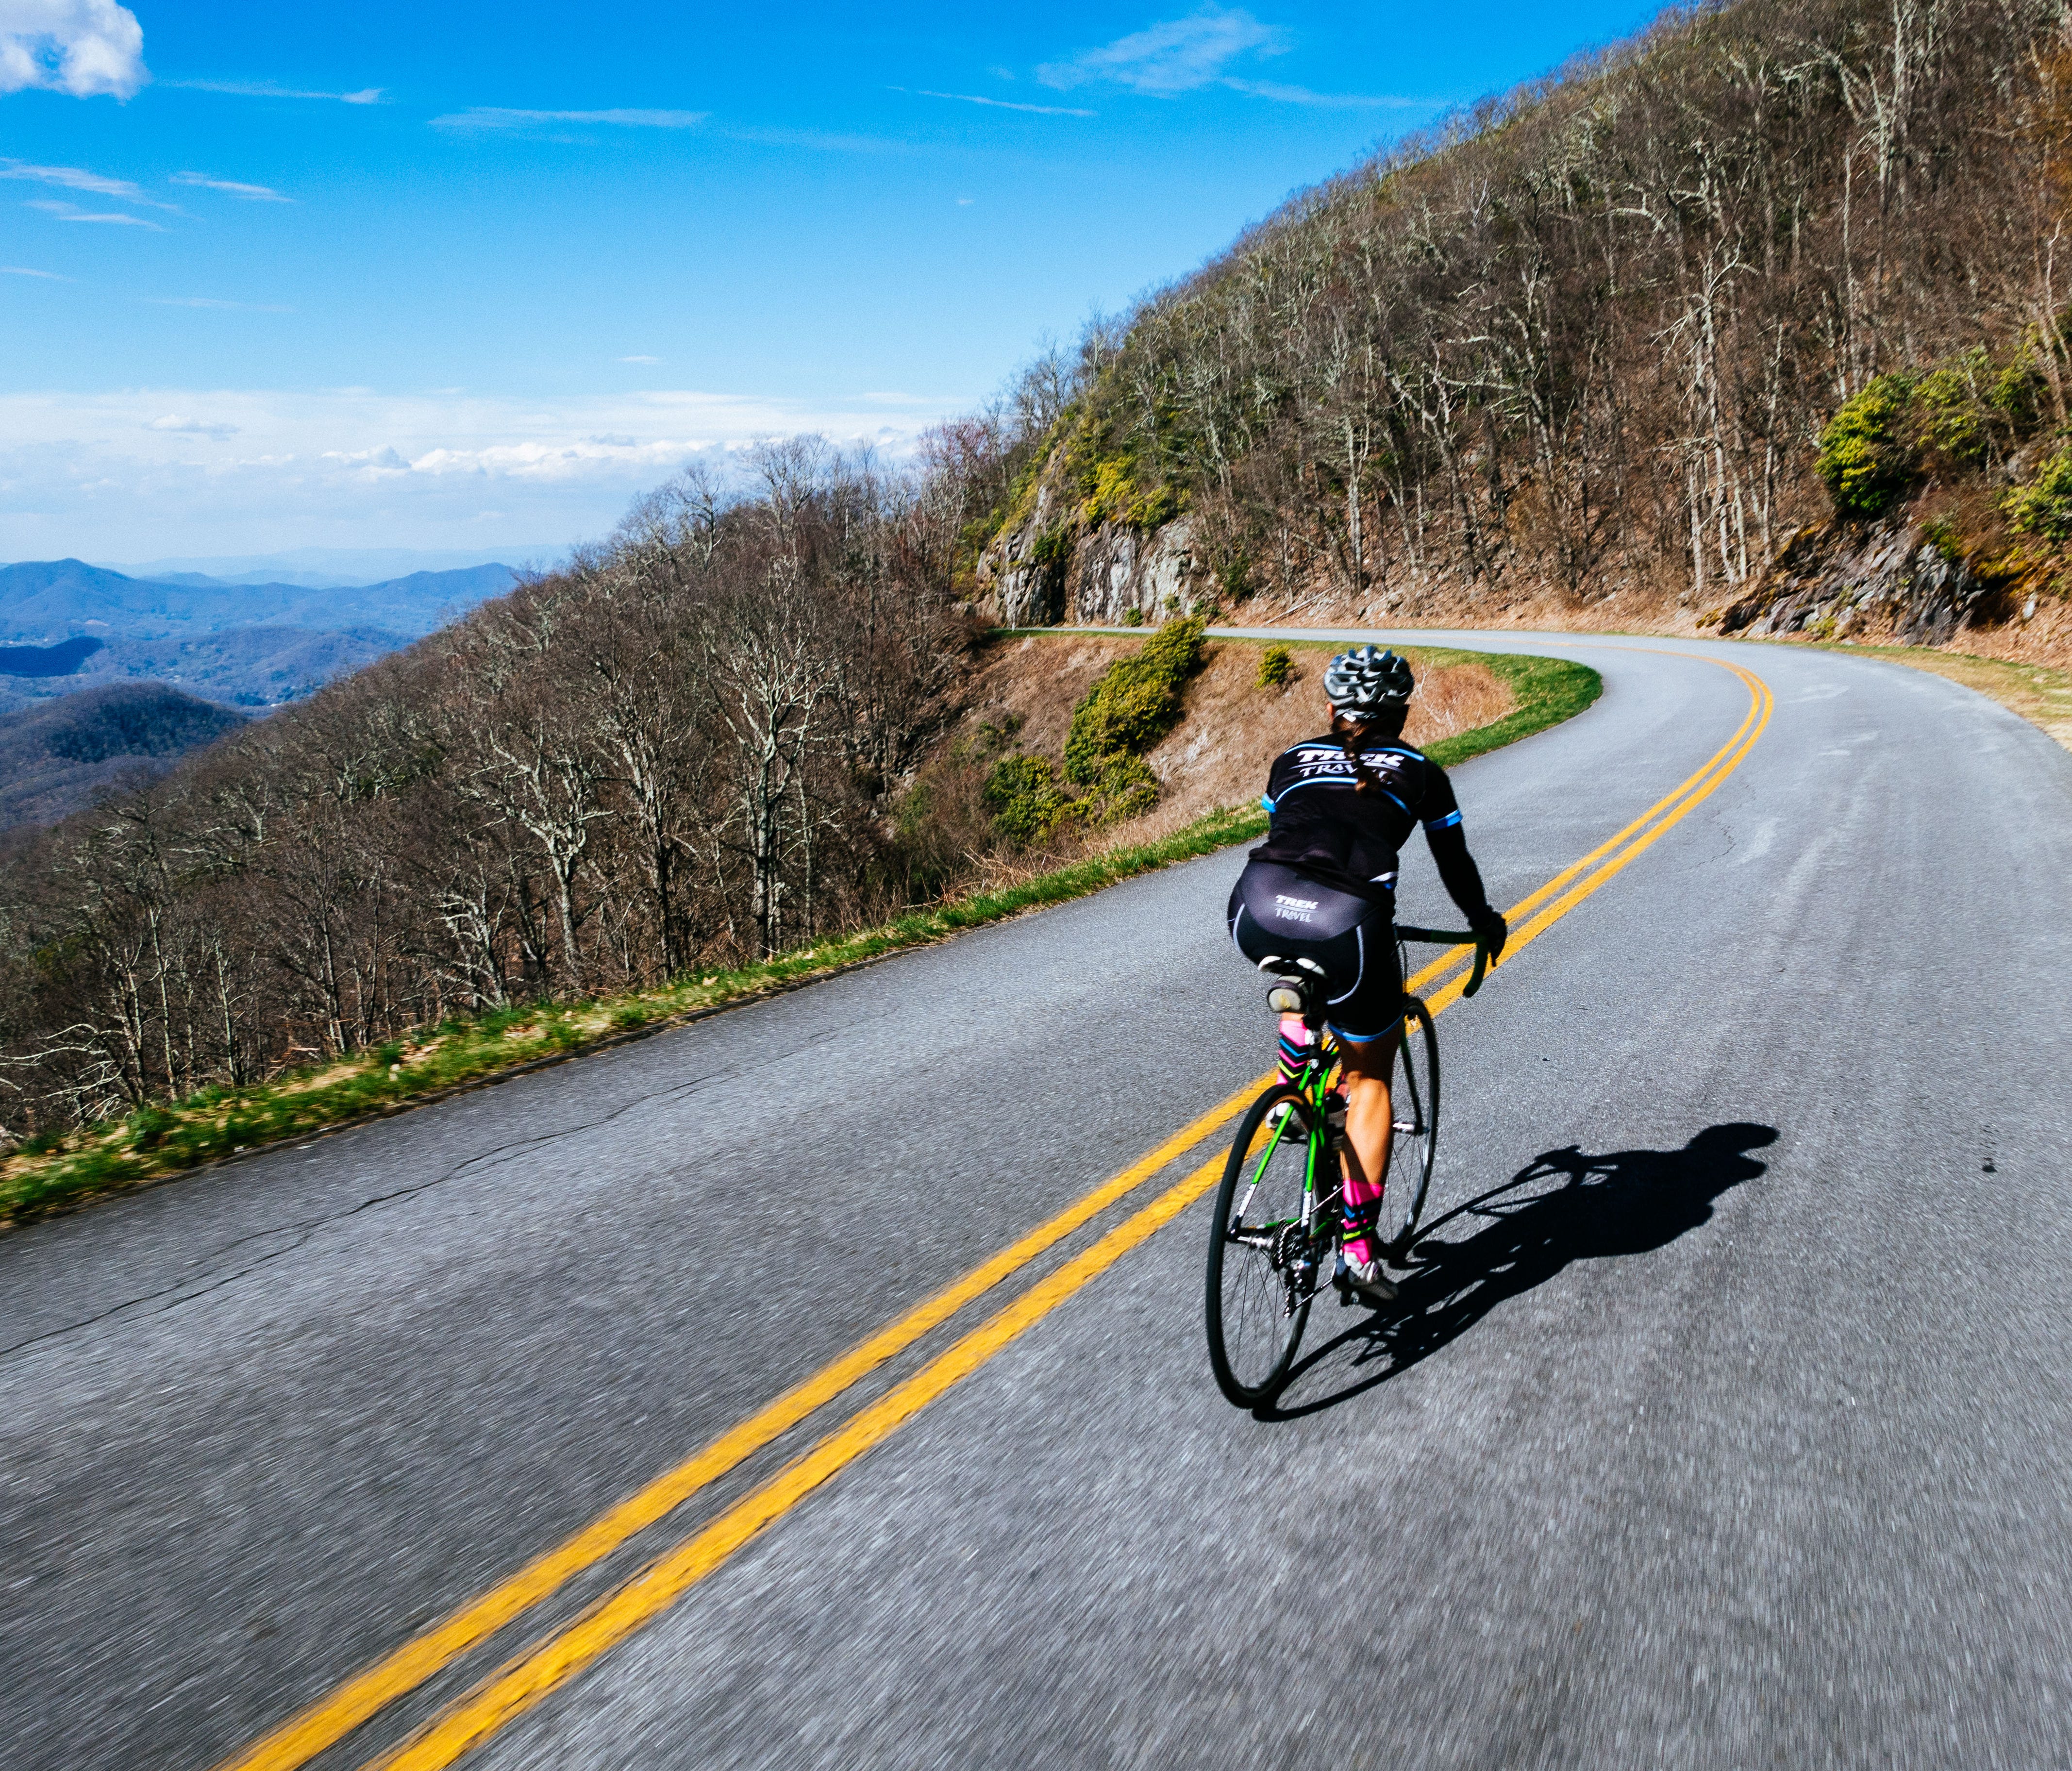 Riding along the Blue Ridge Parkway, you'll pedal the mountains of western North Carolina where you'll find the highest peak east of the Mississippi River. On the Asheville to Brevard trip with Trek Travel, pass rivers and waterfalls as you ride the 